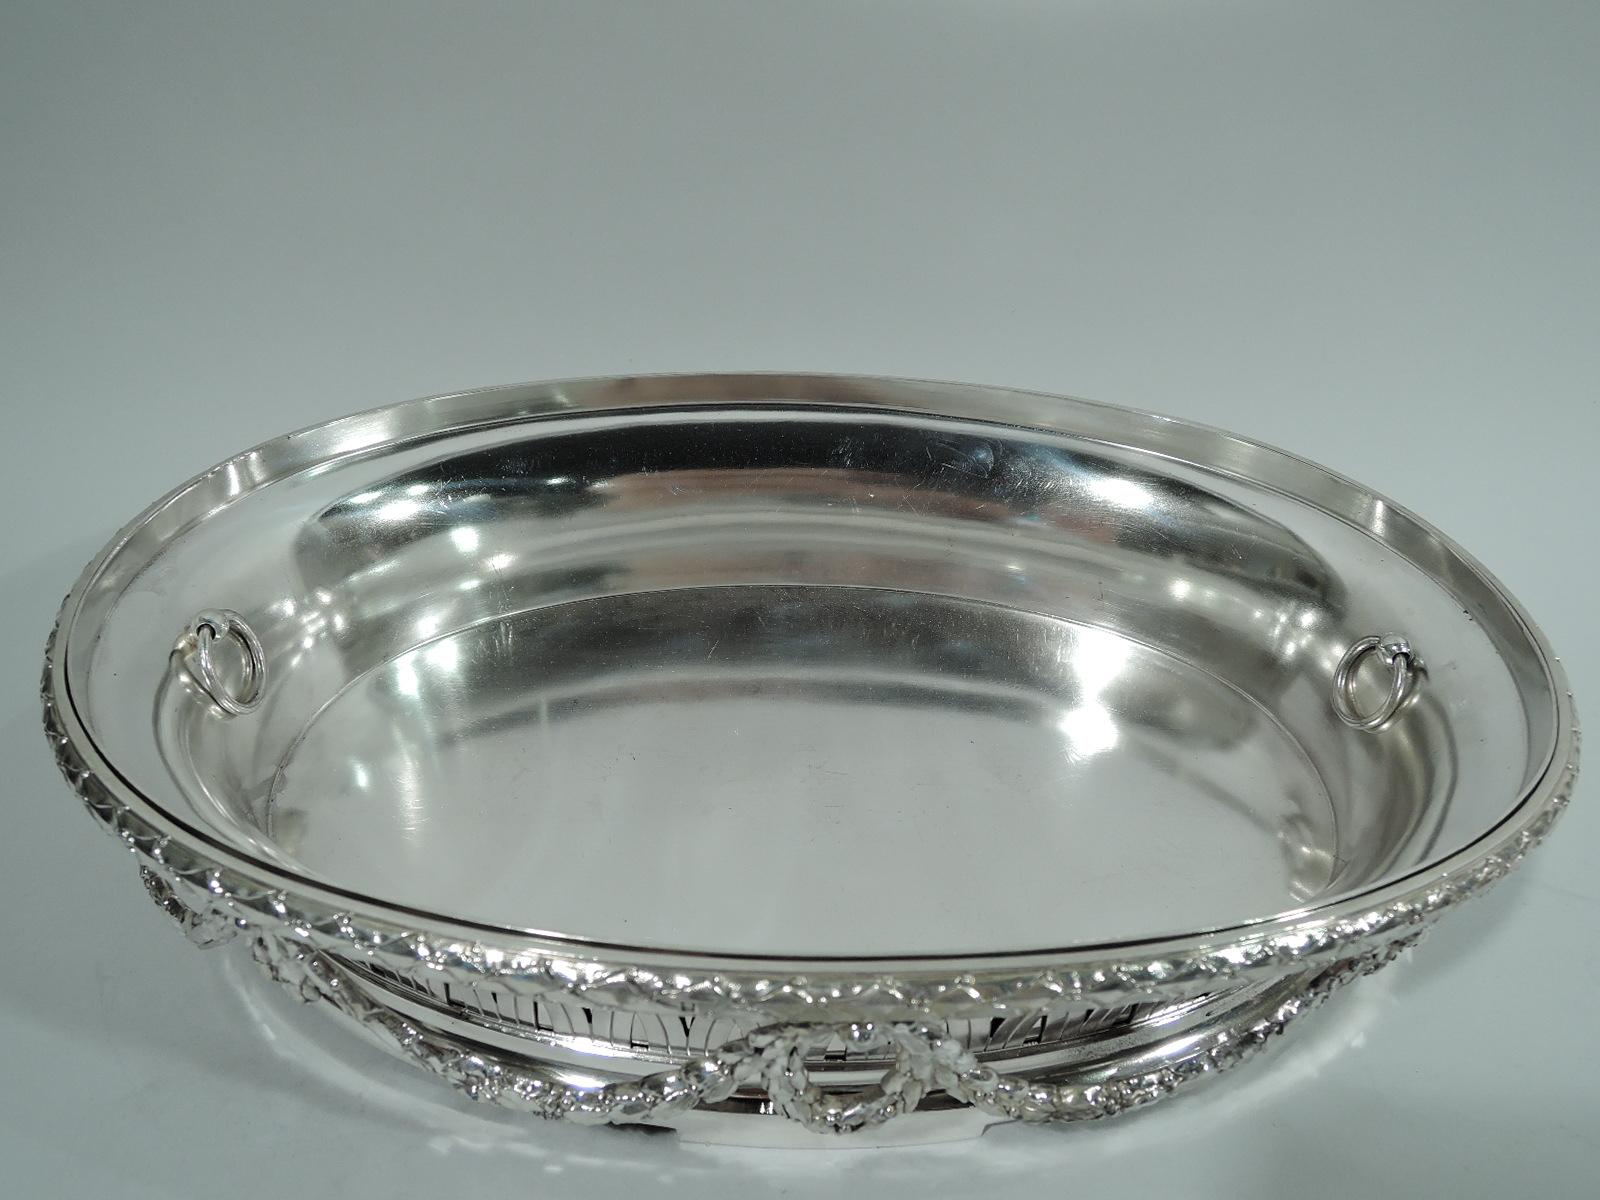 Neoclassical 950 silver jardiniere. Made by Boin-Taburet in Paris, ca 1890. Oval with imbricated leaf-and-berry rim. Sides open interlaced arcade and pendant wreath-and-garland. Open bottom and plain base with rectilinear supports. Original